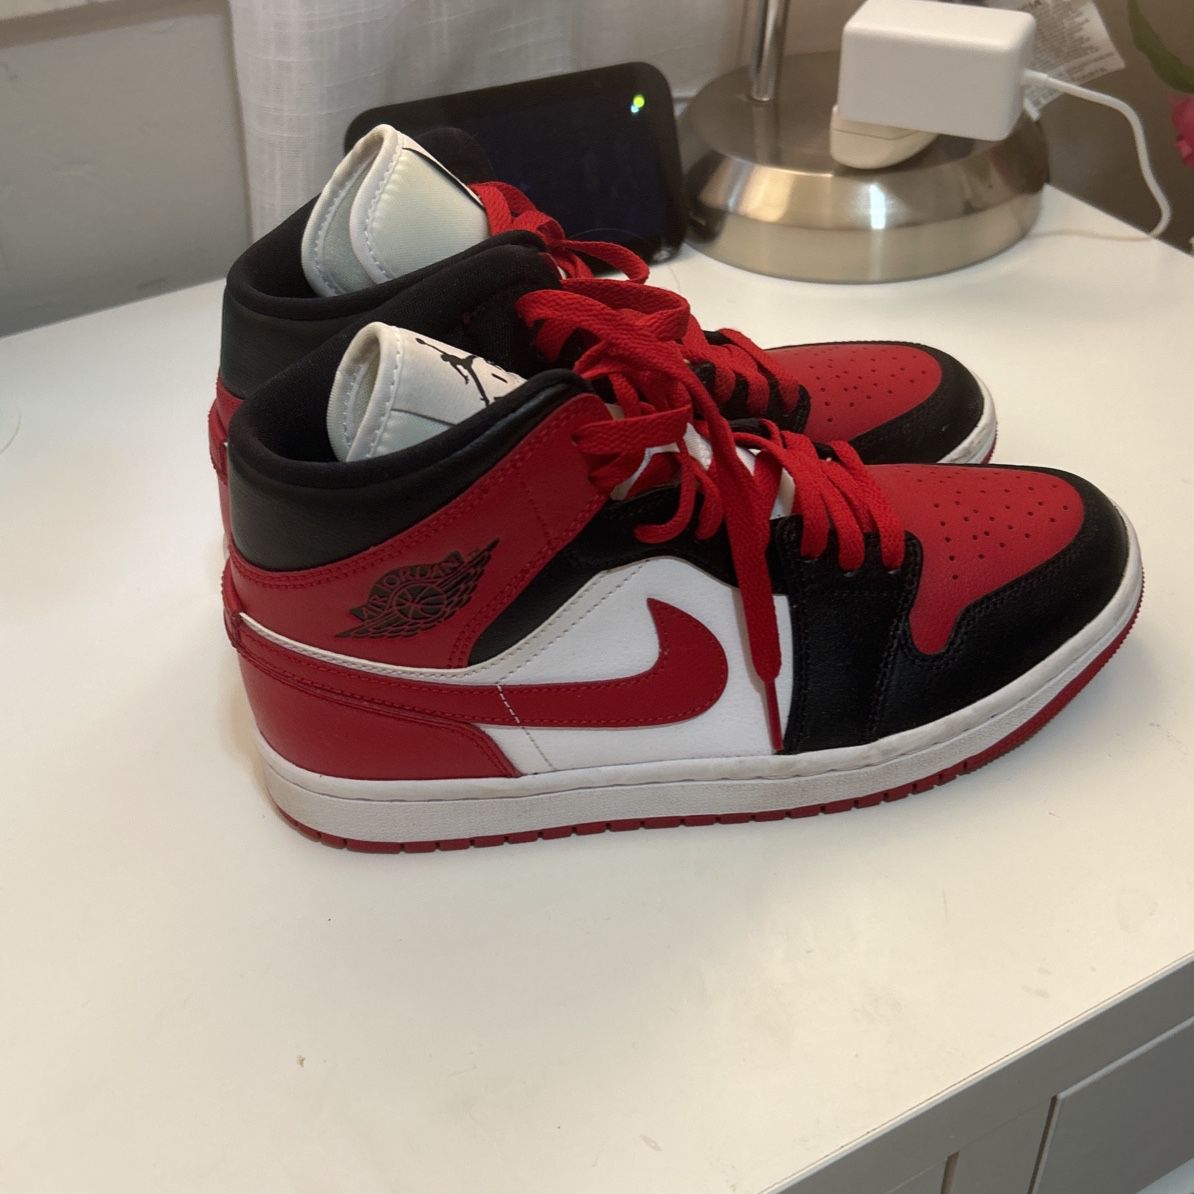 Women’s Air Jordan 1 Mid, Red Black and White Colorway 